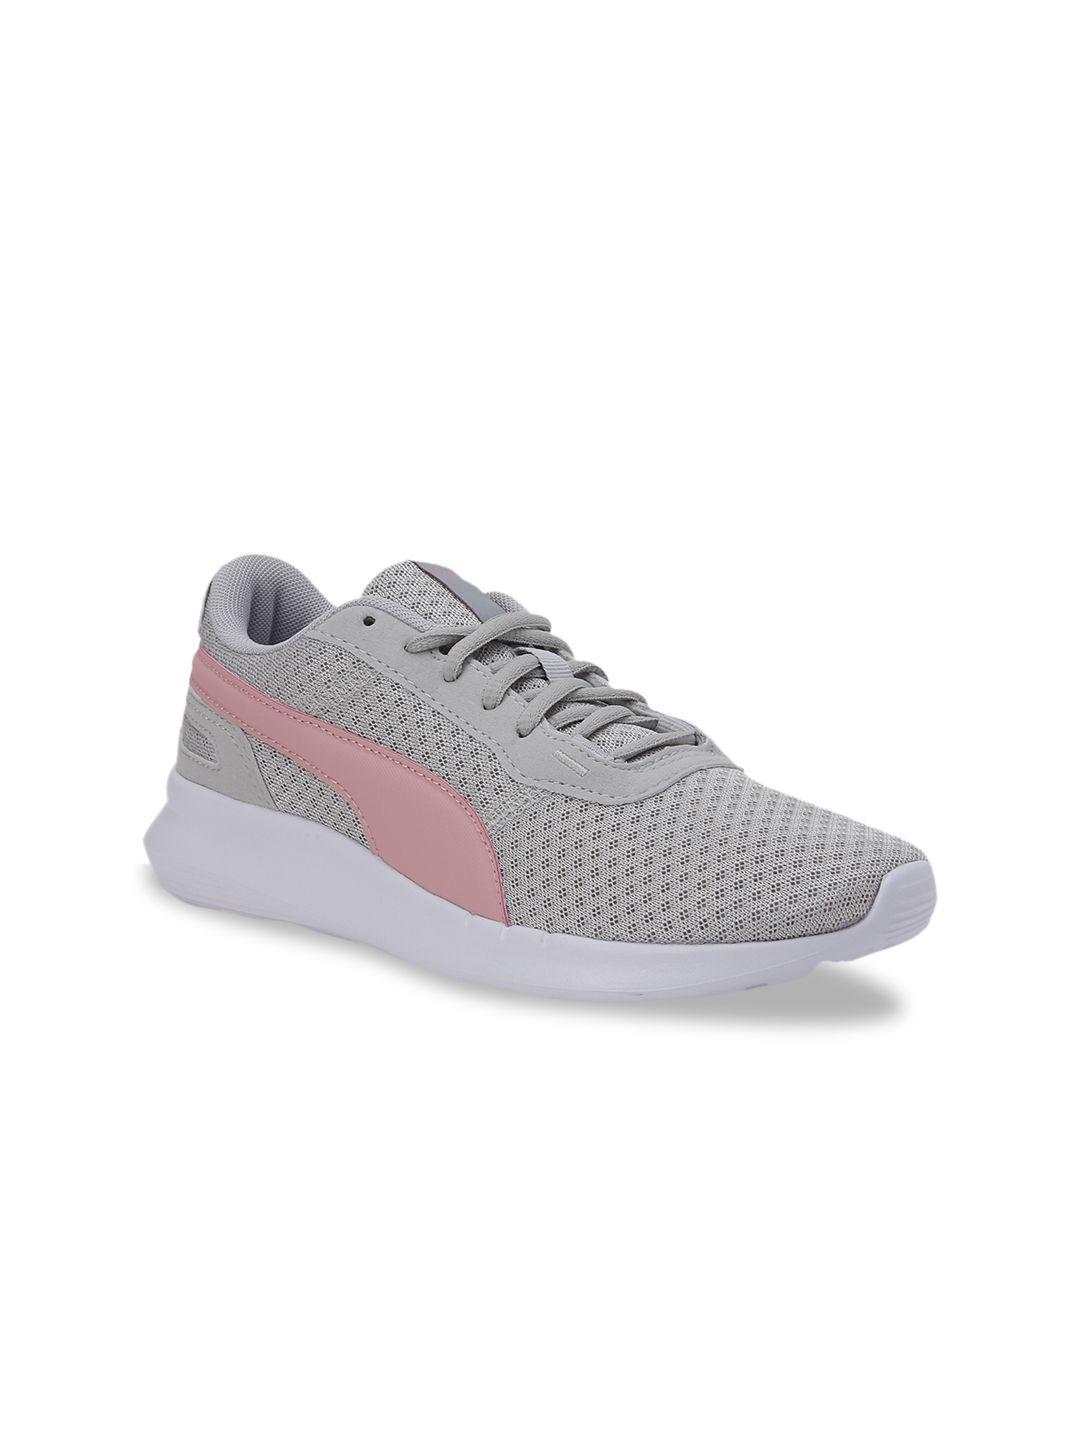 puma kids grey & pink st activate jr sneakers